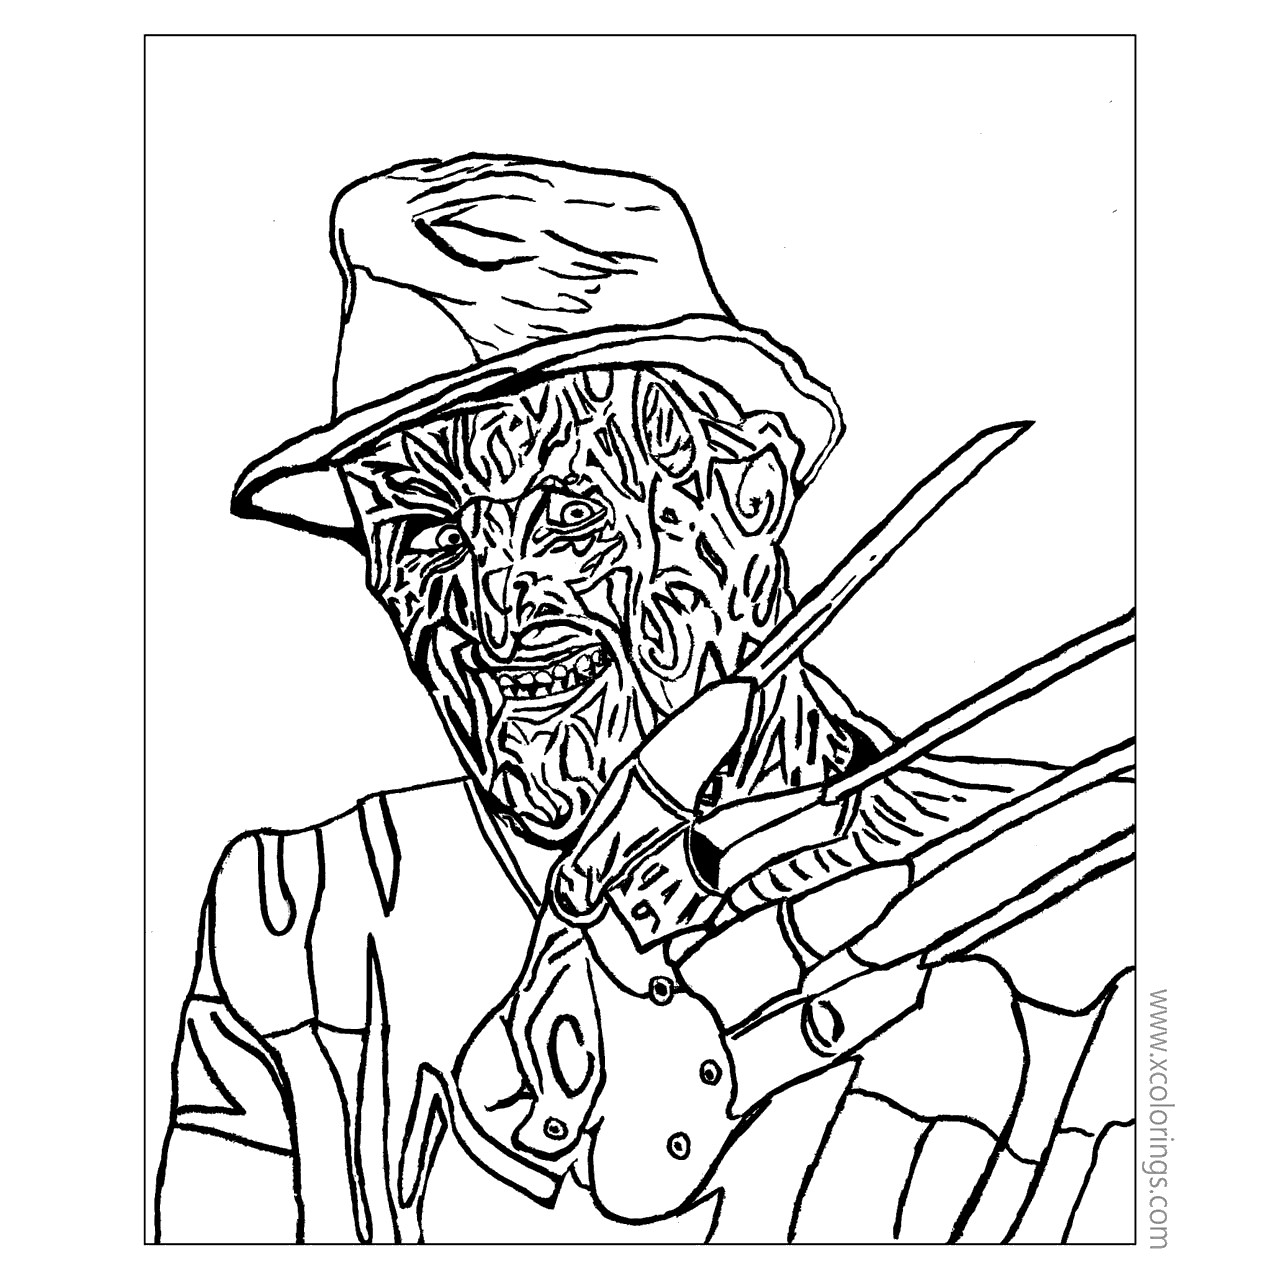 Freddy Krueger with Glove Coloring Pages - XColorings.com